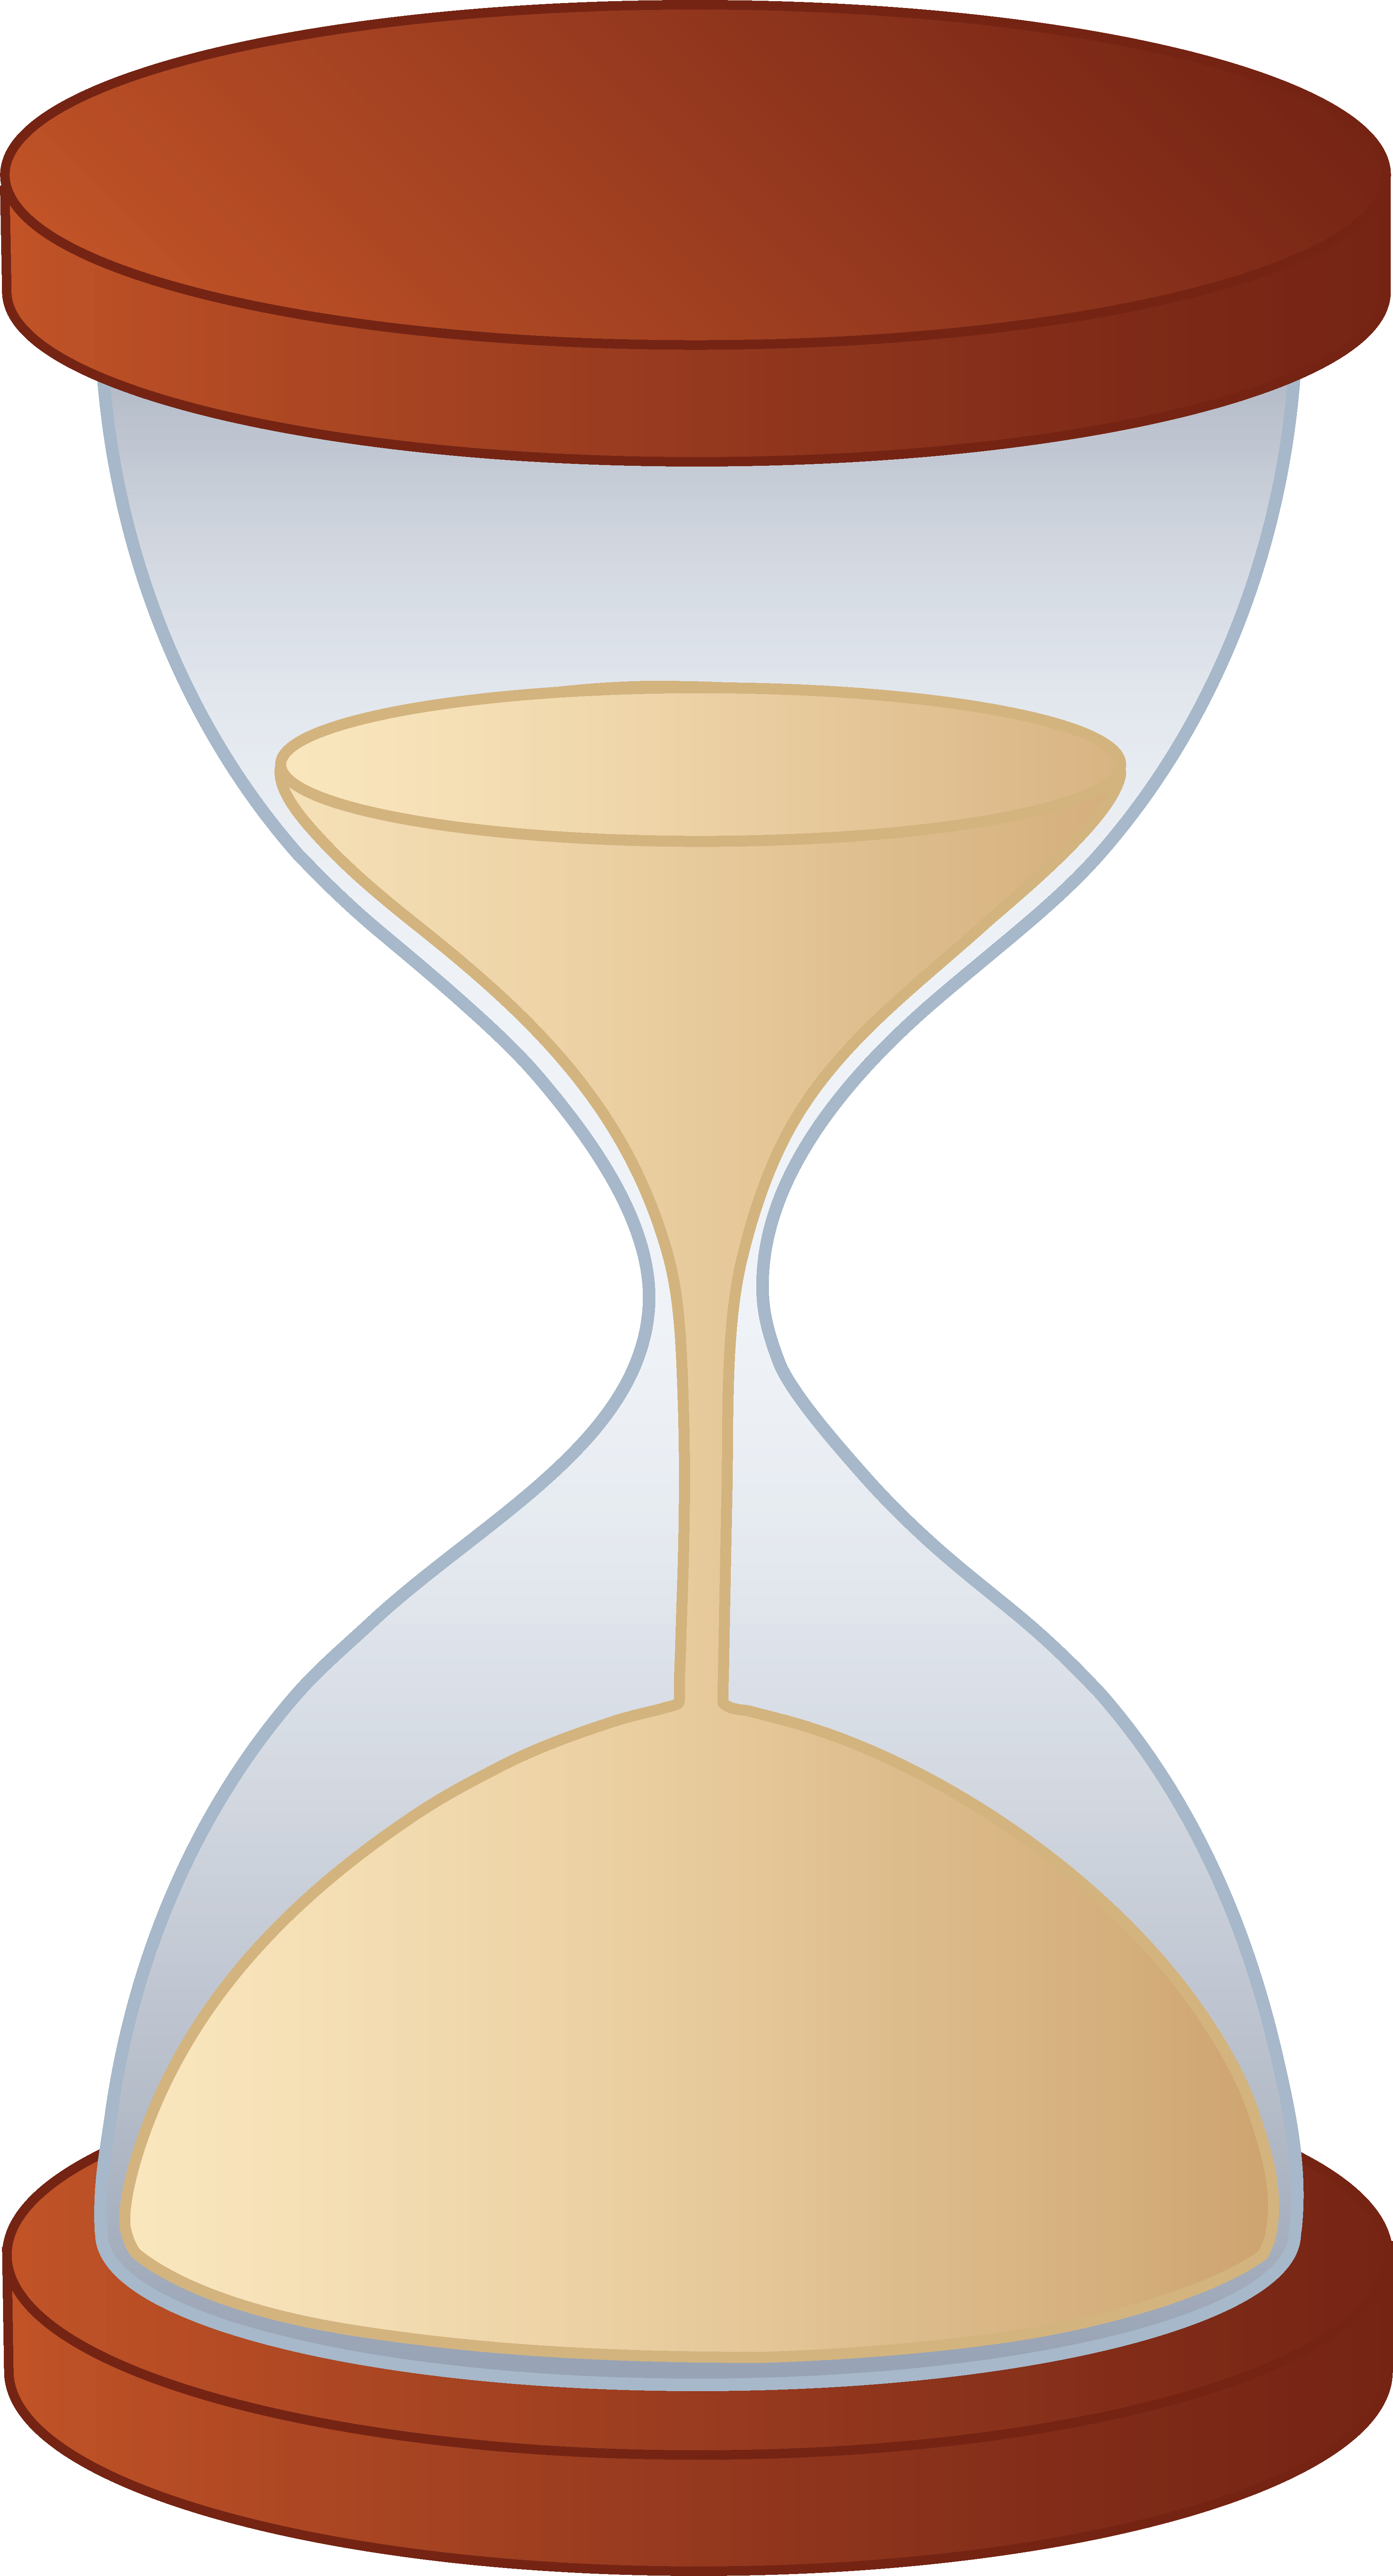 Hourglass Png Clipart - Hourglass, Transparent background PNG HD thumbnail